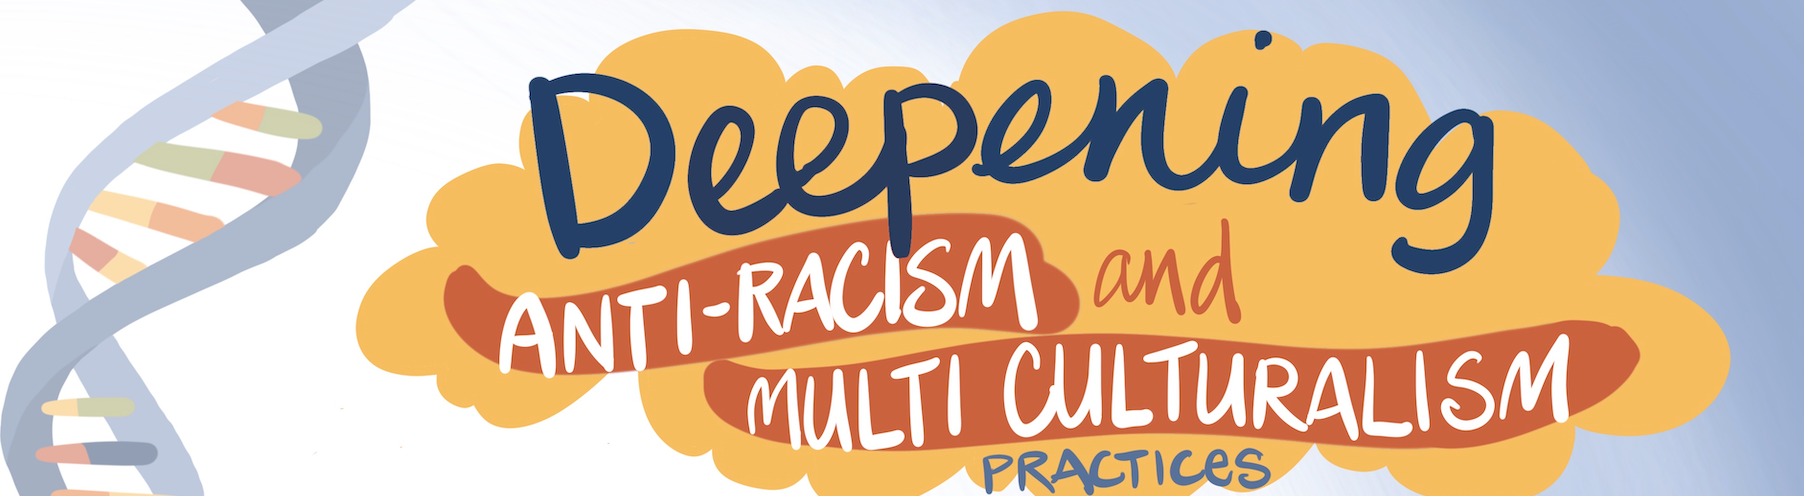 Deepening Antiracism and multiculturalism practices